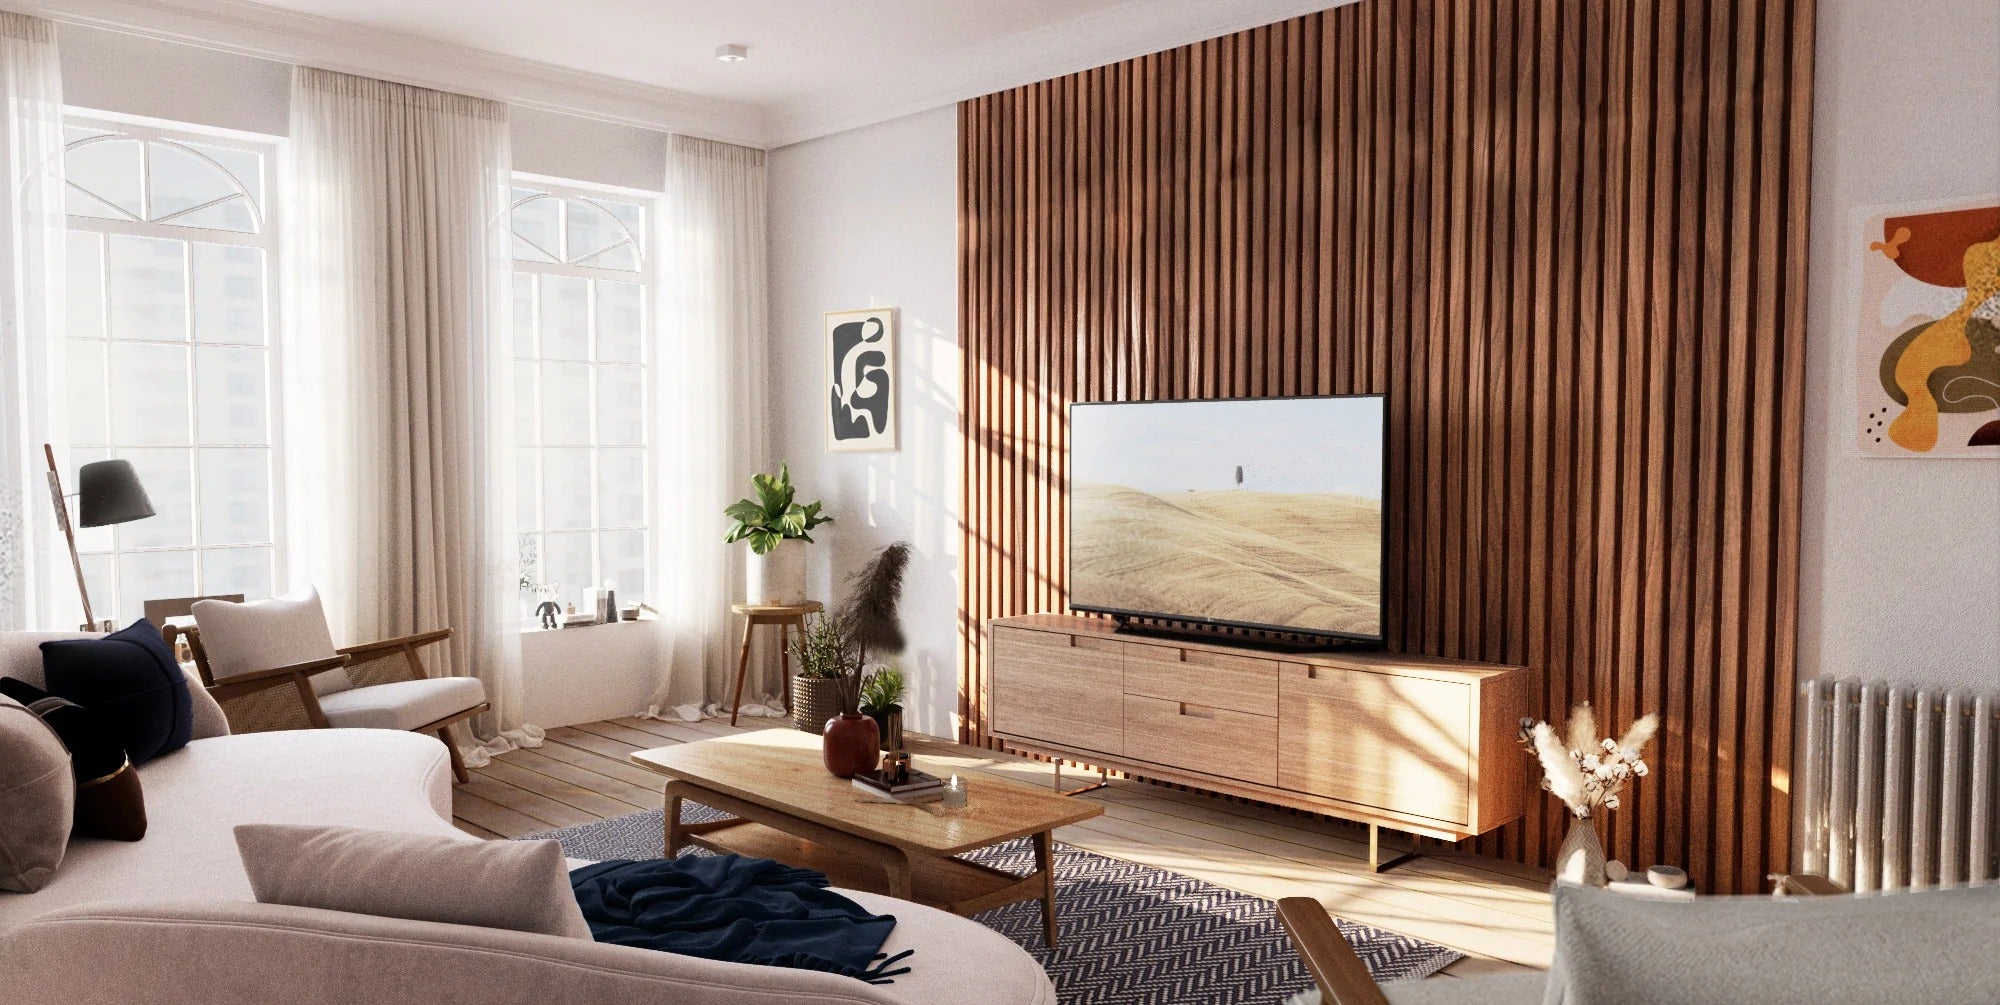 Bright living room with light-filled windows, cosy seating, and wood accent wall panels behind the TV, highlighting elegant interior design.